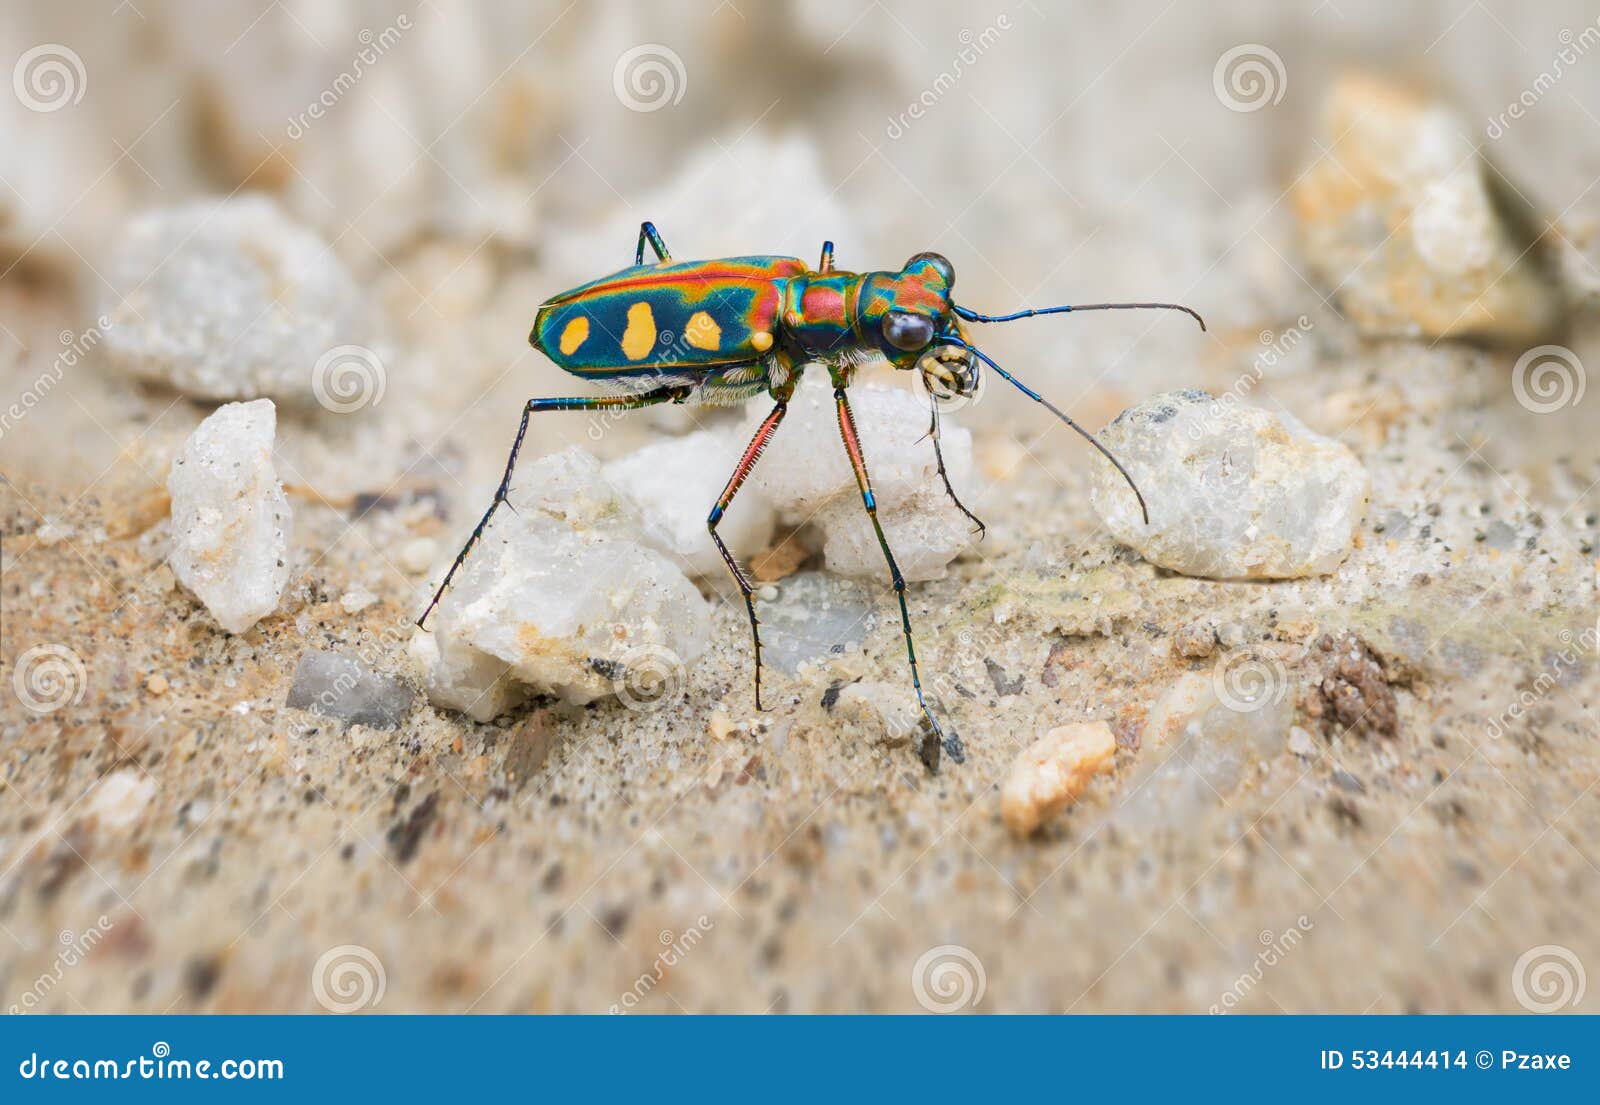 extreme closeup of a brightly colored tiger beetle in the wild